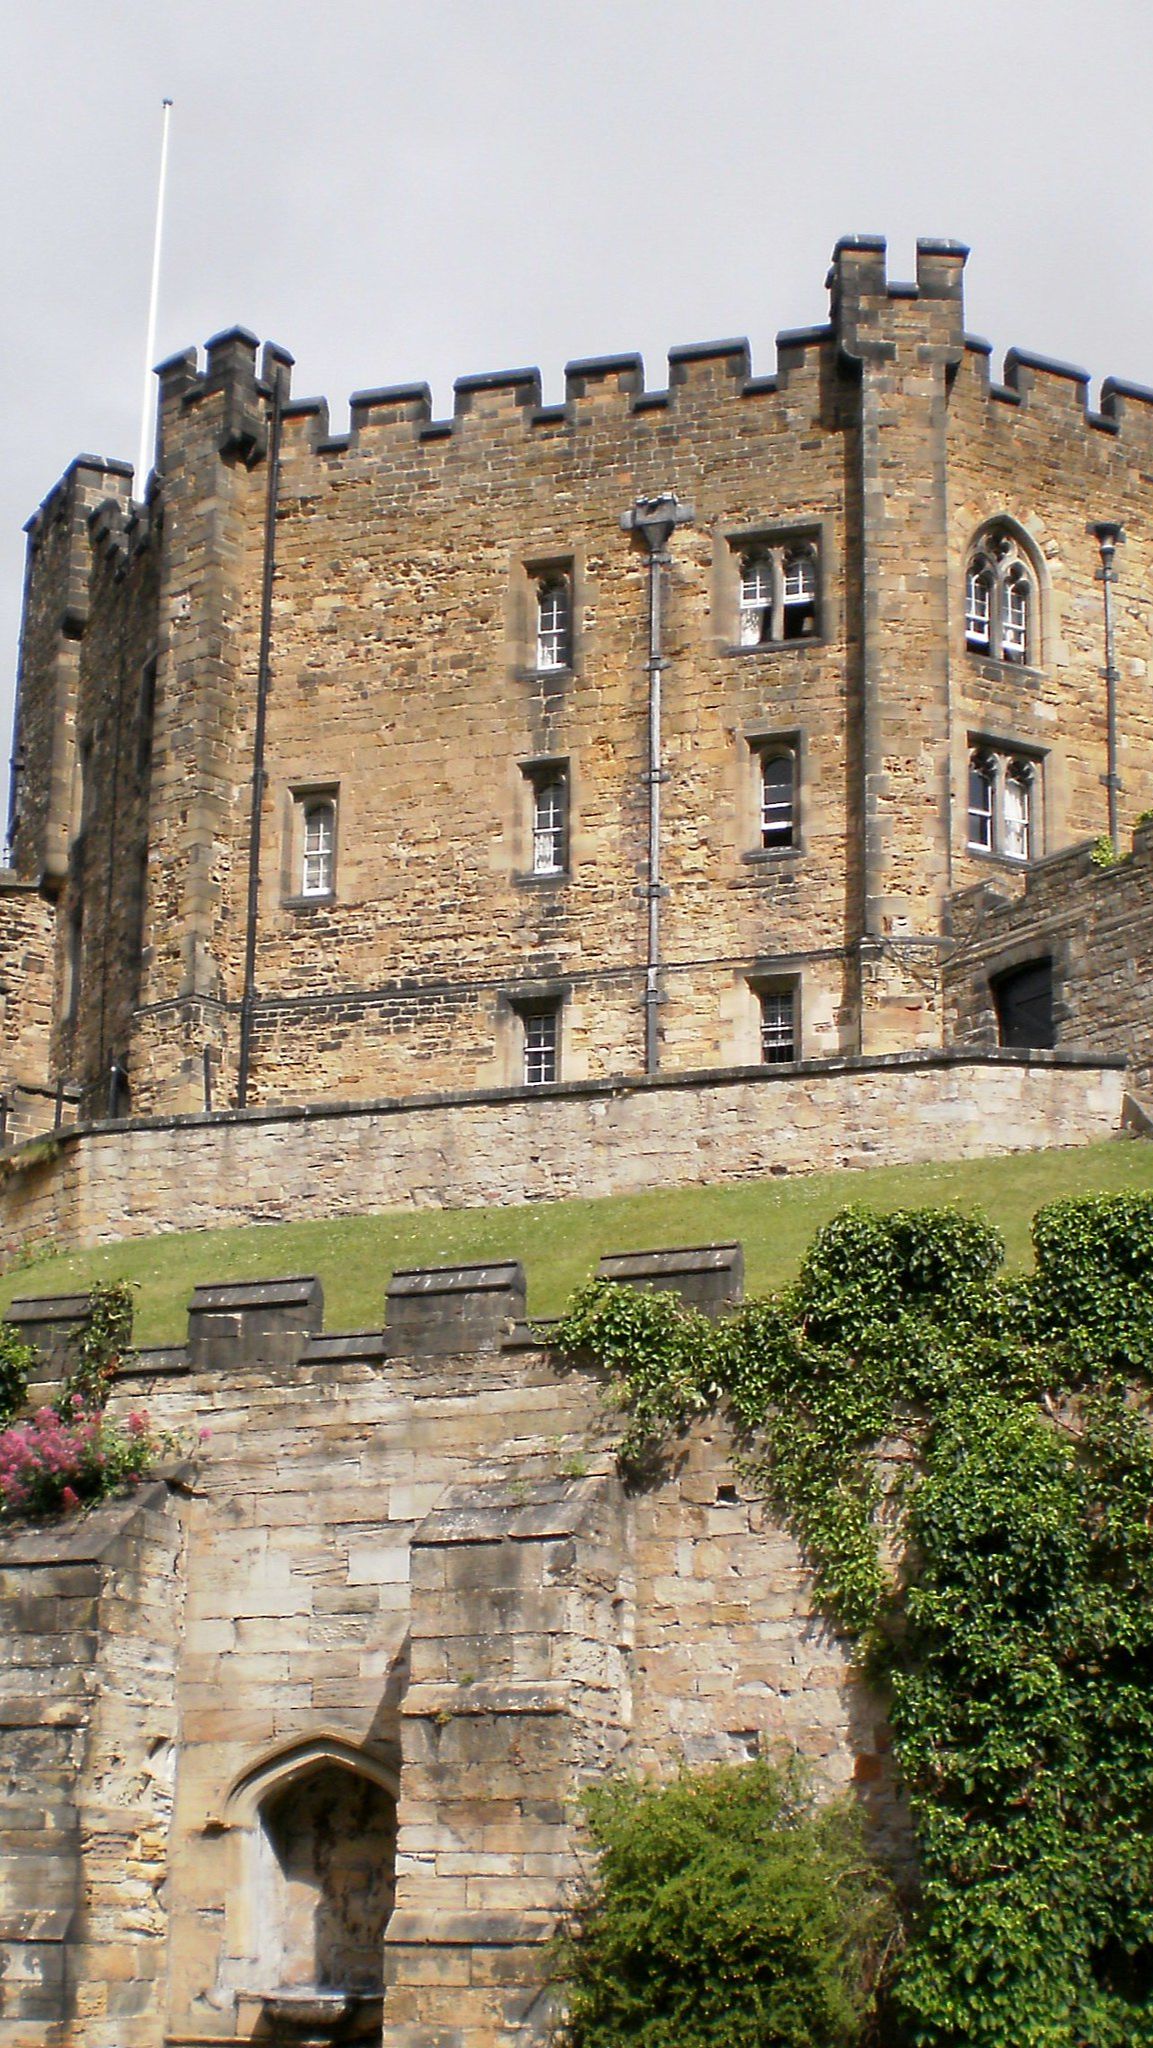 1. Castle Crypt, Durham Castle: The Chamber of Secrets